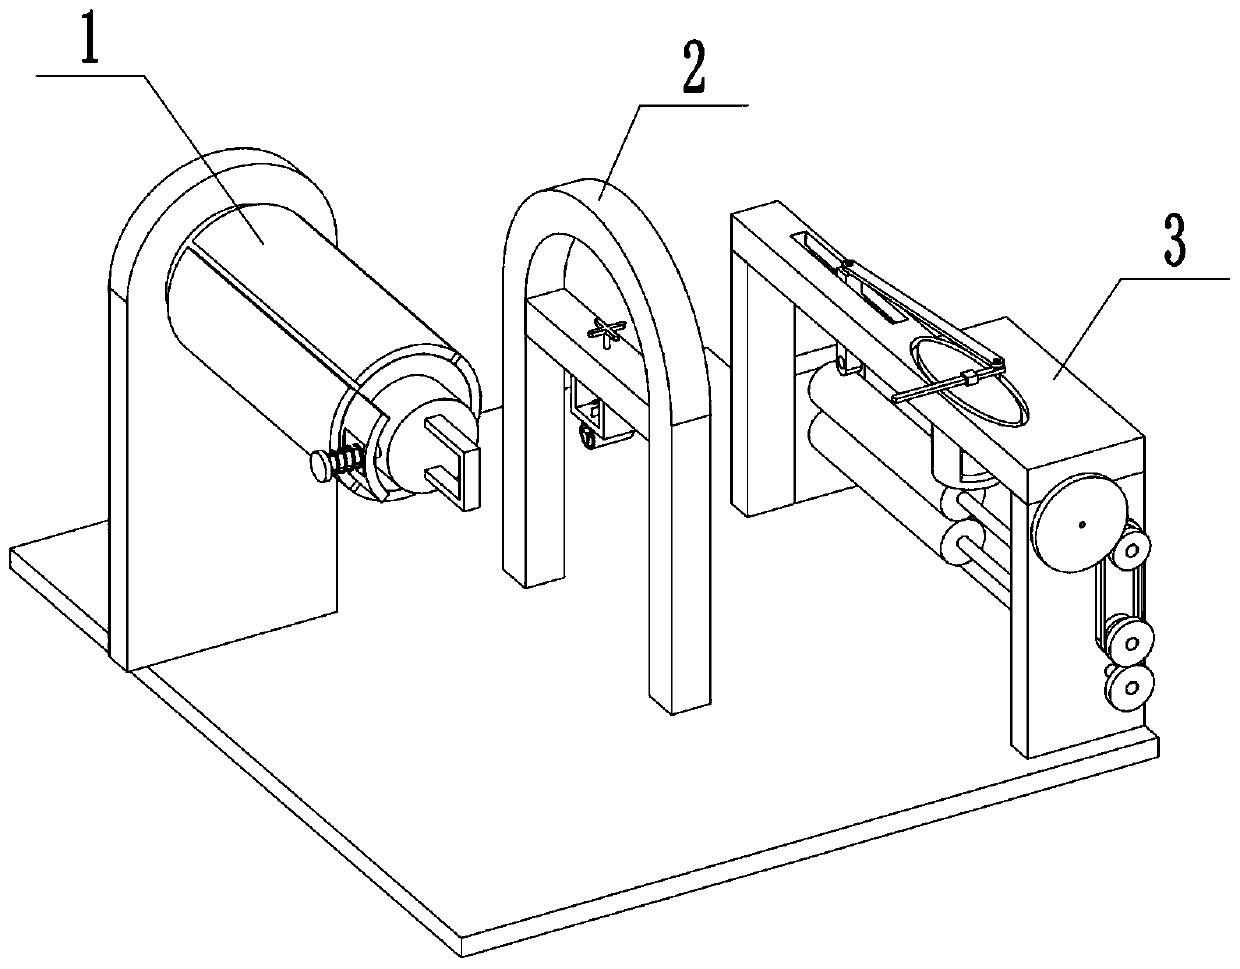 Computer net wire or wire skin stripping winding device